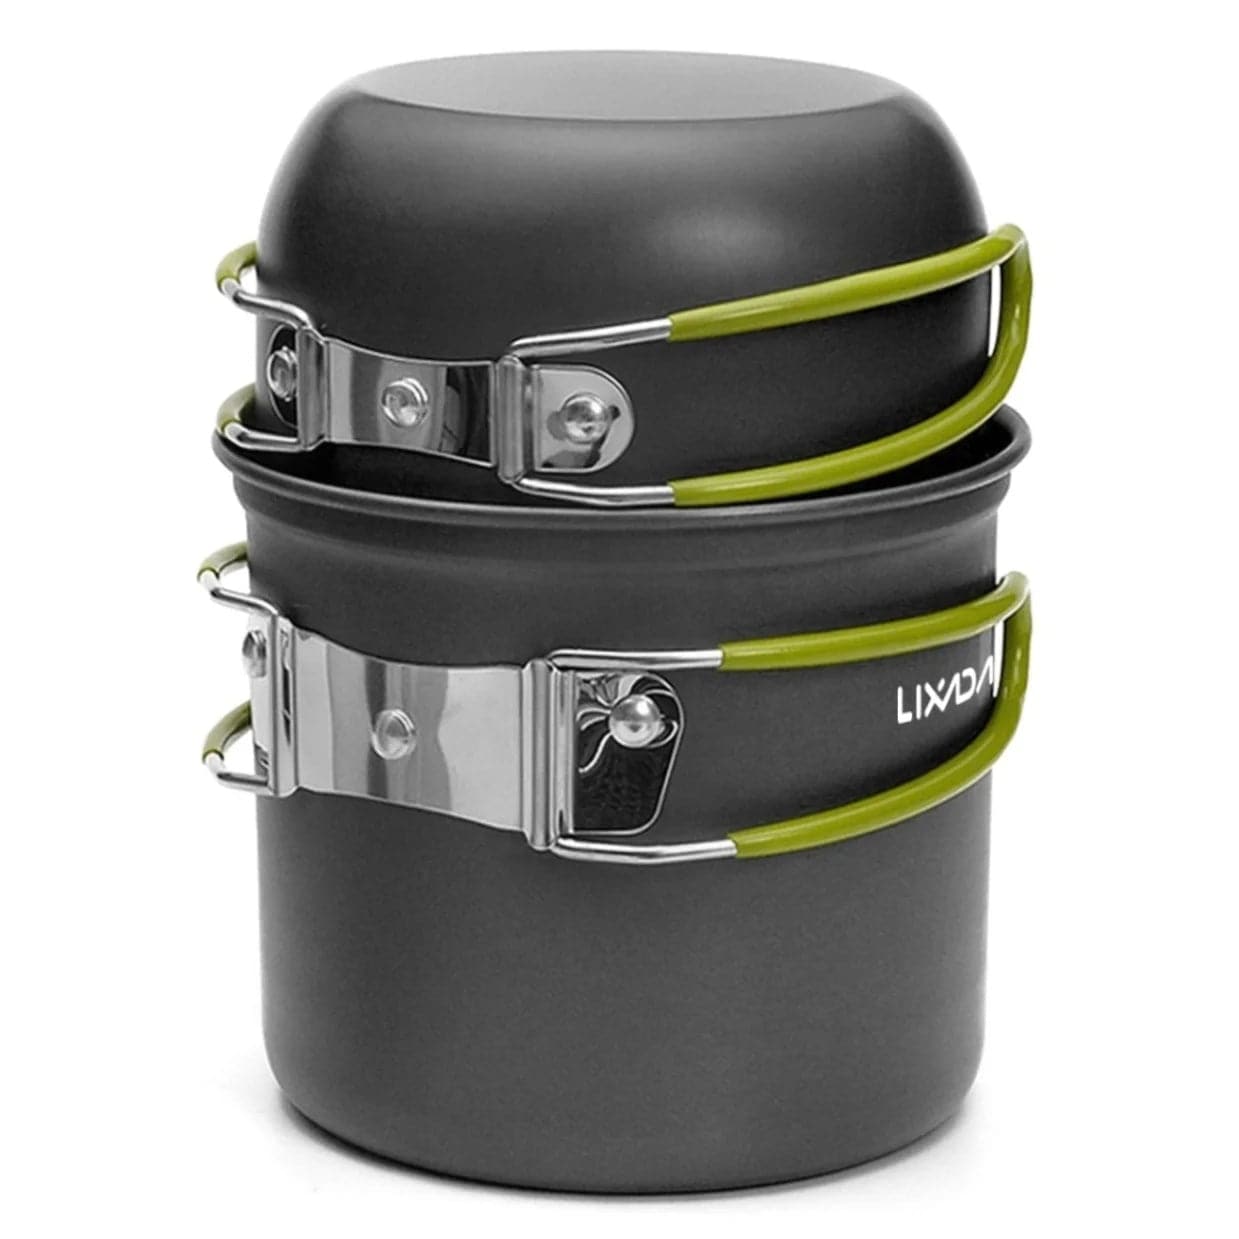 Compact & Durable Camping Cookware Kit with Foldable Utensils and Lightweight Design - Betatton - 